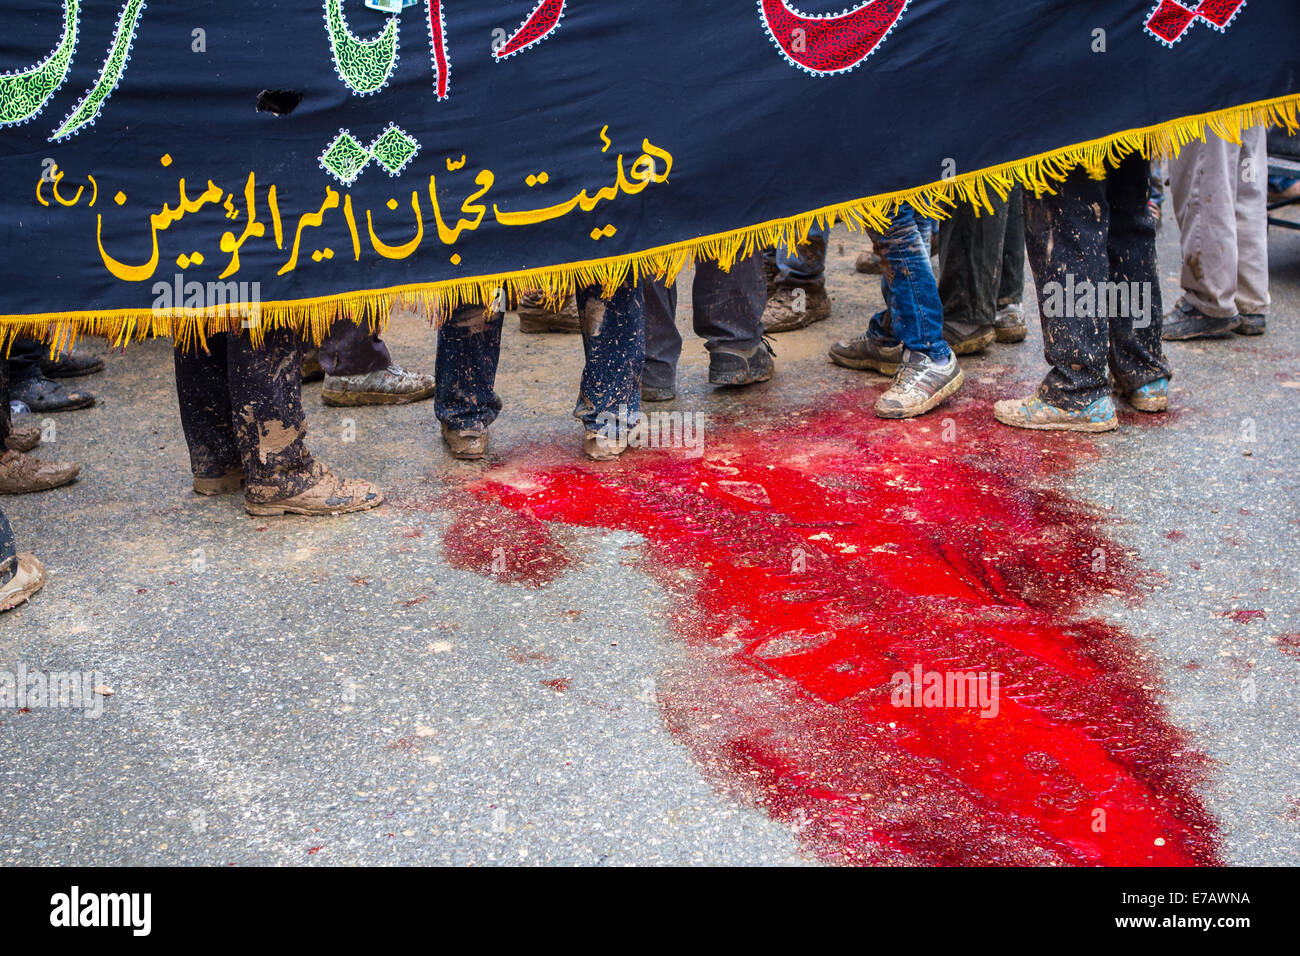 Shiite Muslim men, standing in the blood of a ritually slaughtered sheep, on Ashura Day, in Bijar, Iran. Stock Photo